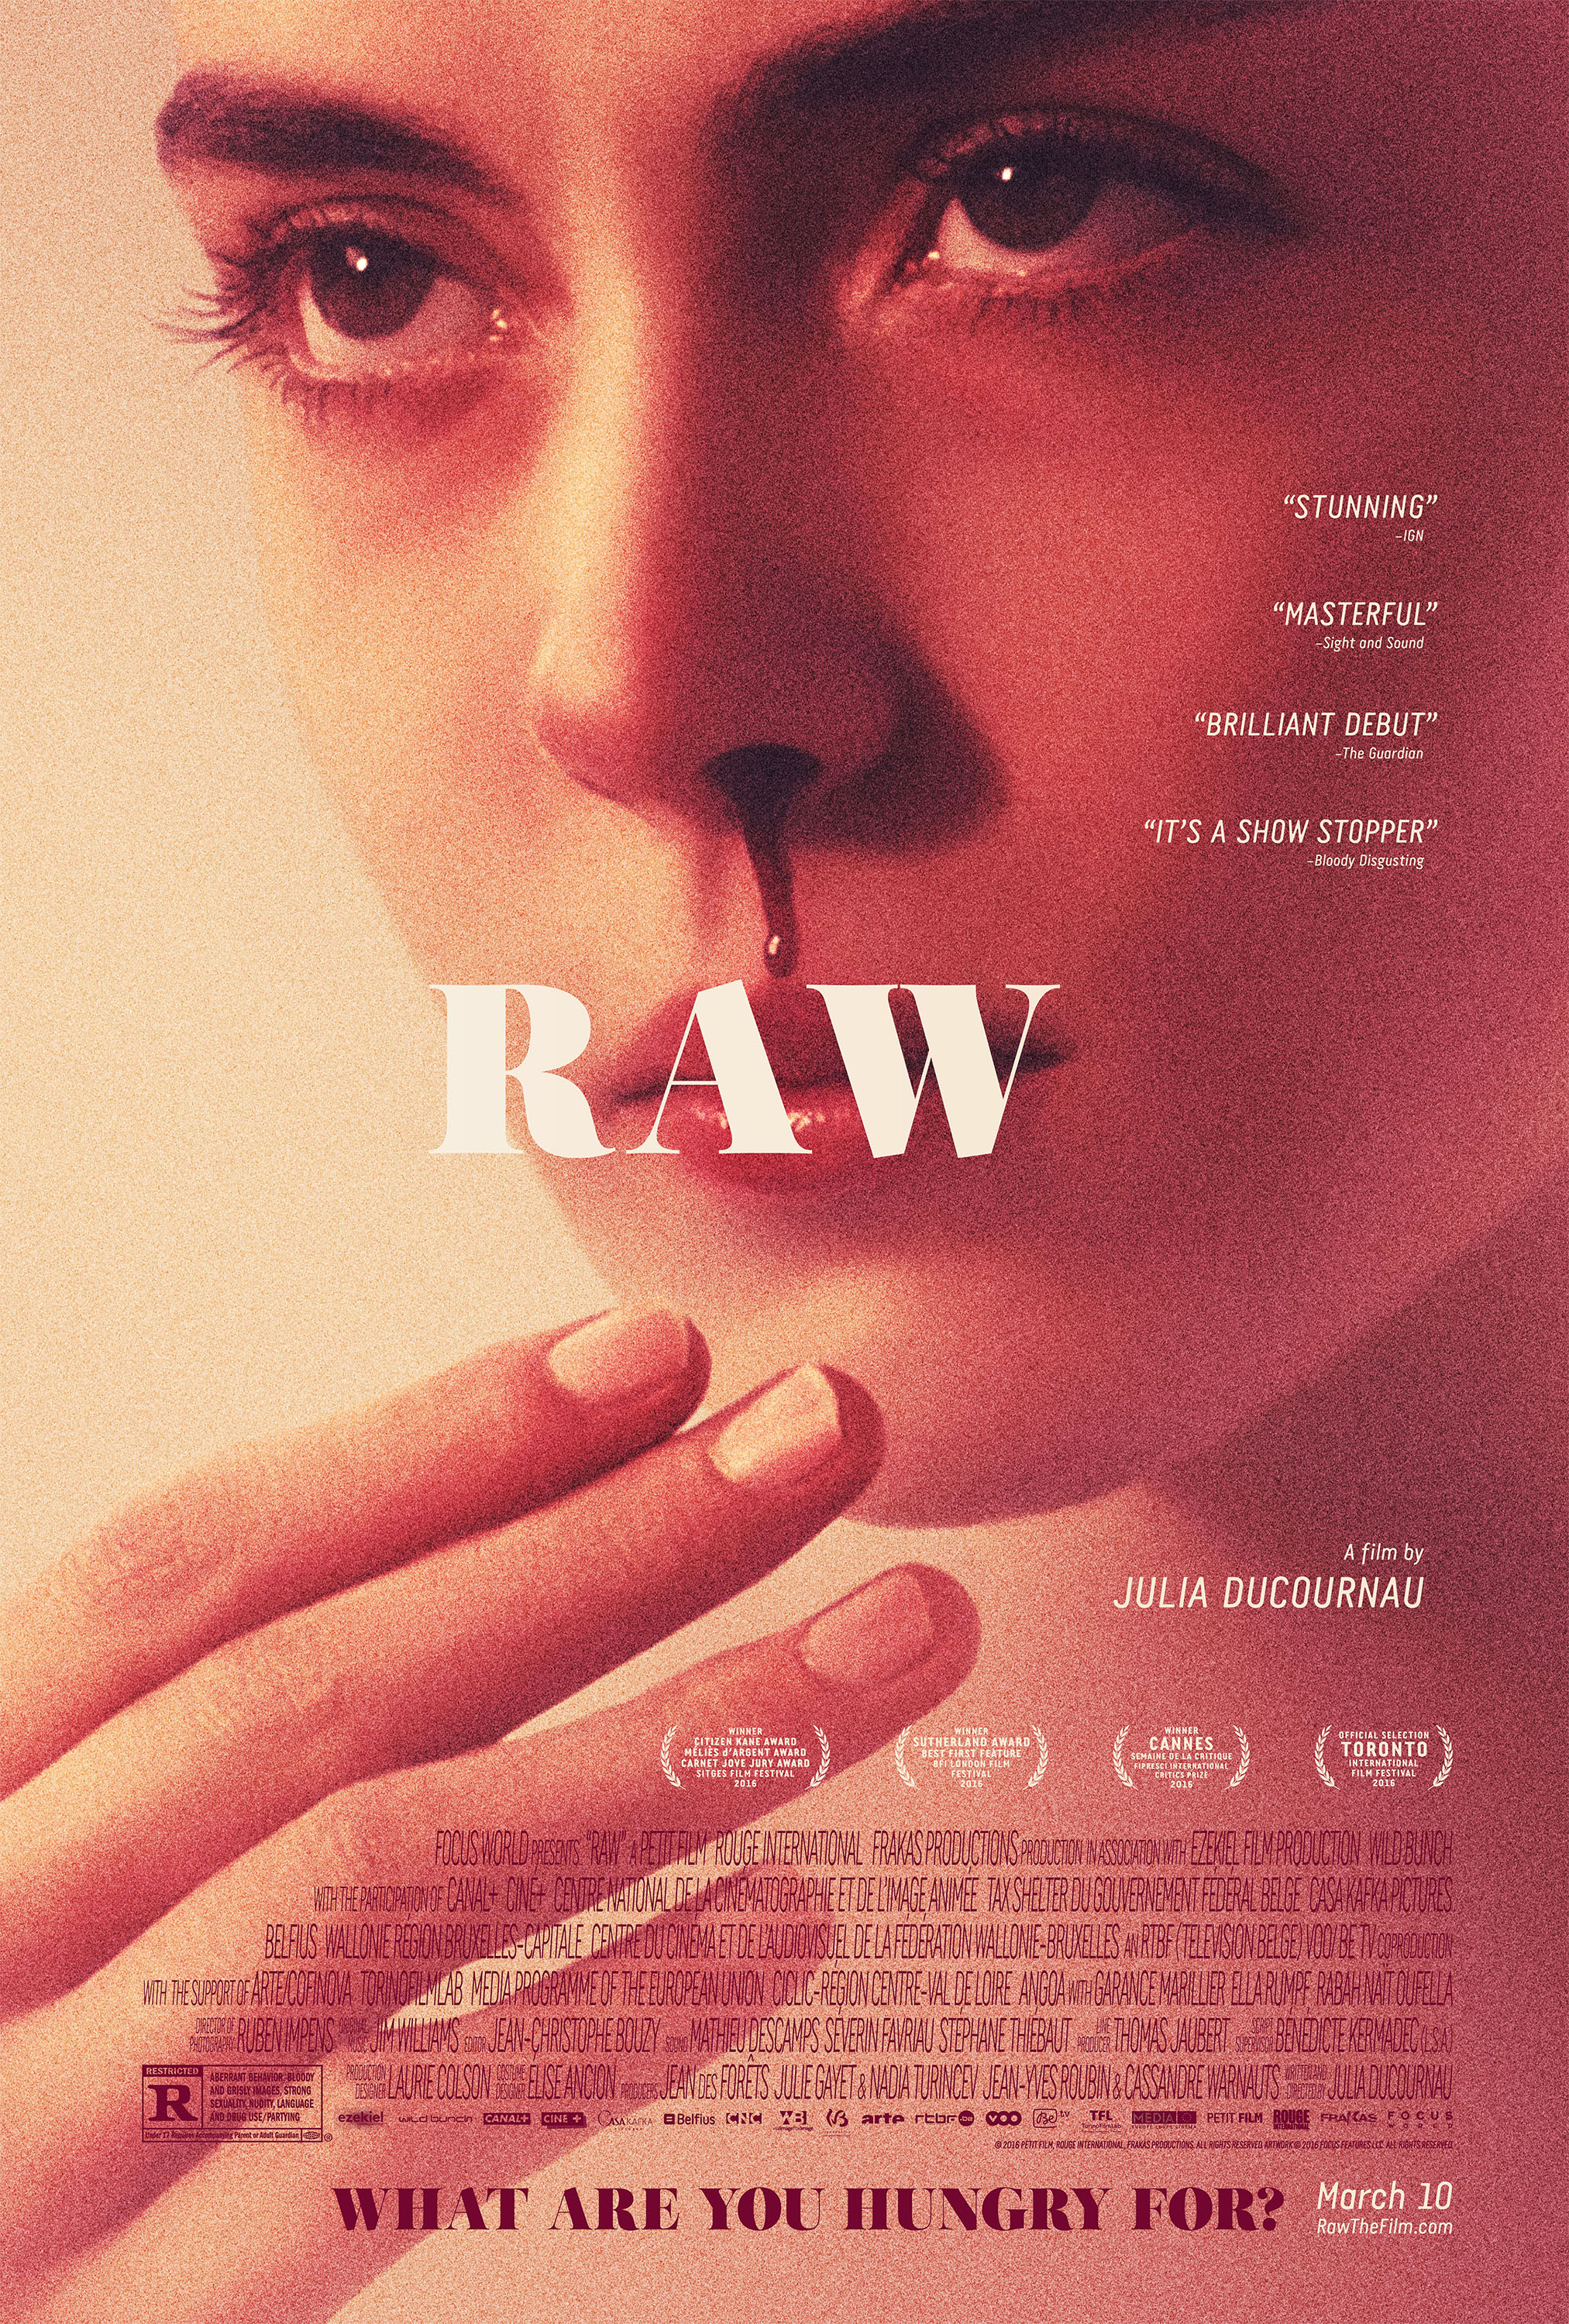 Claim YOUR Ticket to the March 15th Boston Premiere of Julia Ducournau’s RAW